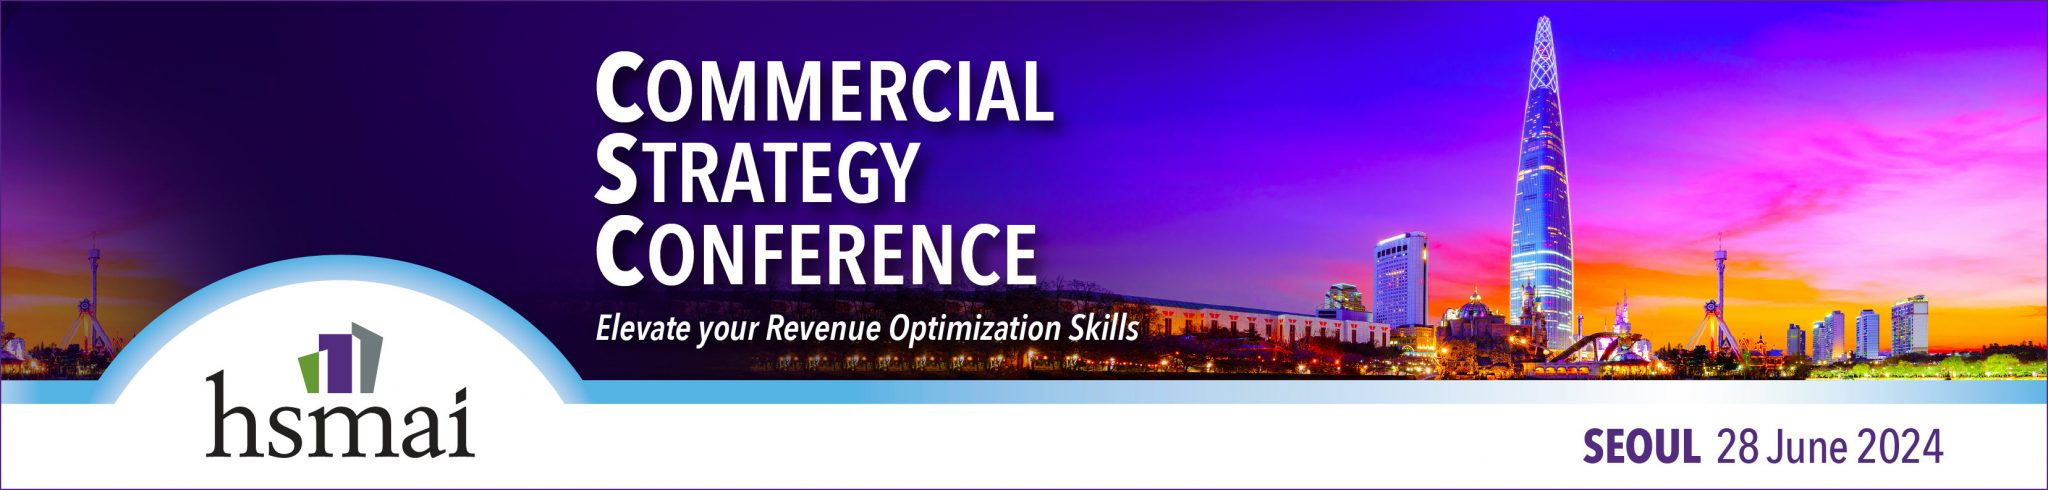 HSMAI Commercial Strategy Conference – Seoul